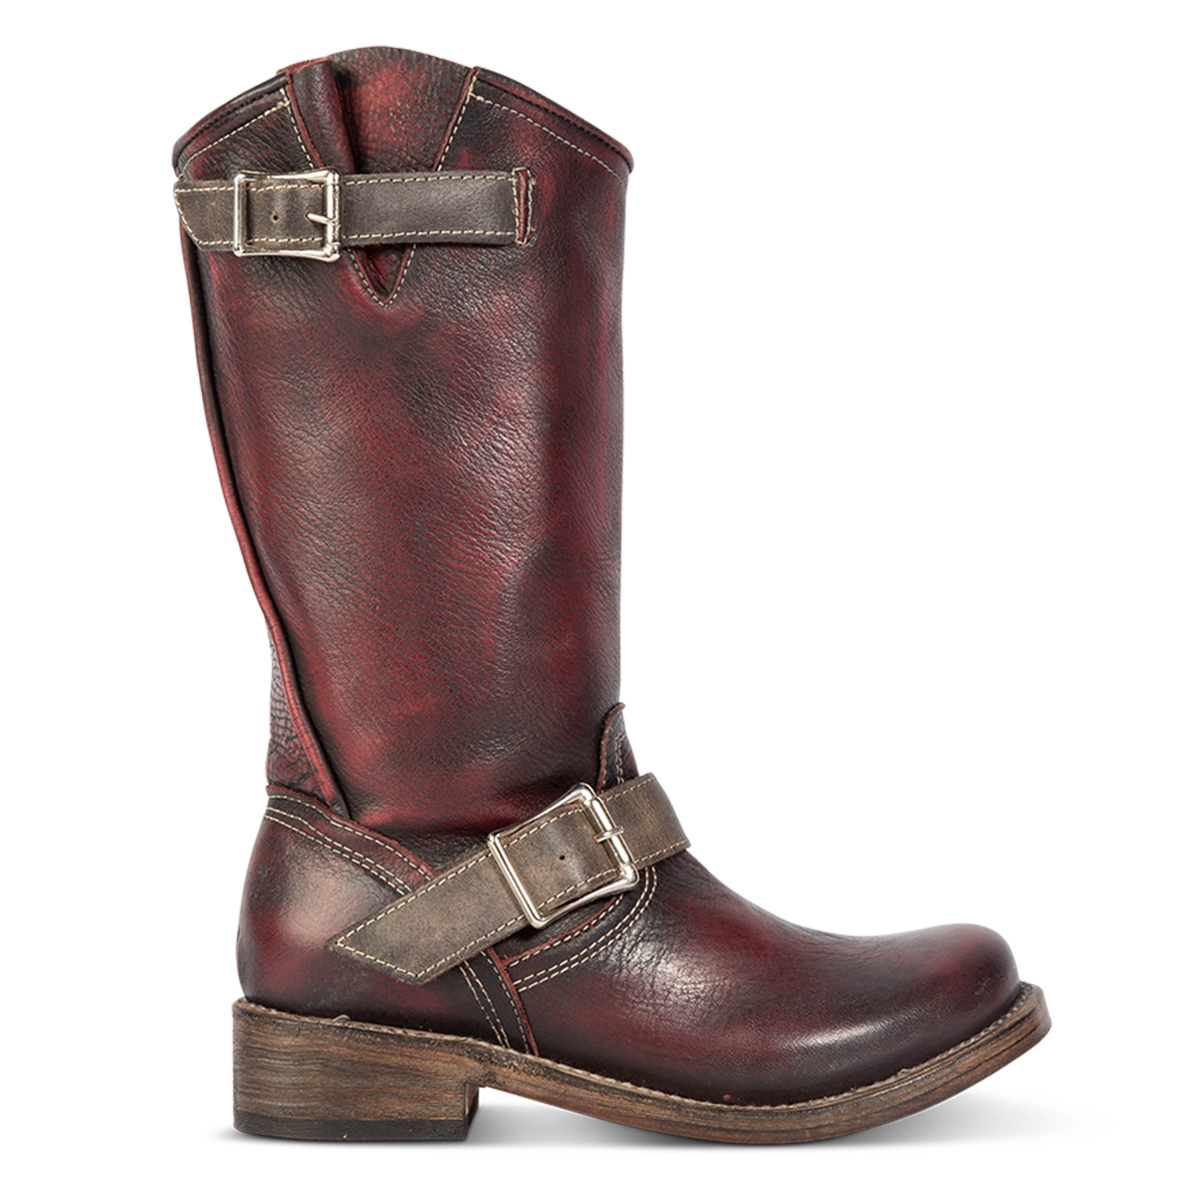 FREEBIRD women's Crosby wine featuring full grain leather, buckle straps, and a hidden pocket